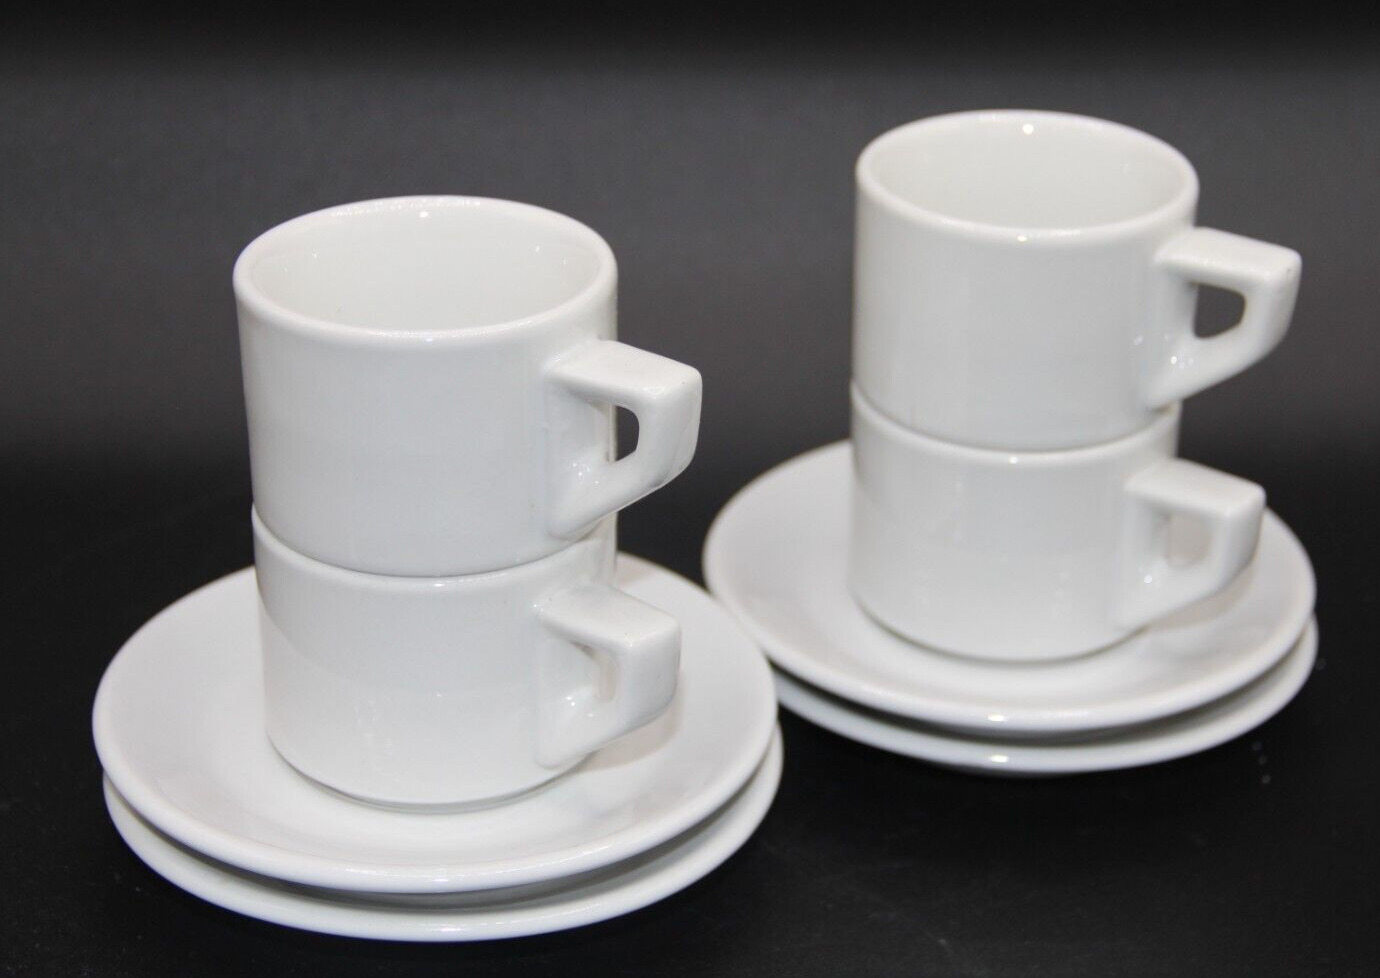 ACF Espresso Demitasse Coffee Cups & Saucers White Porcelain Set Of 4 White